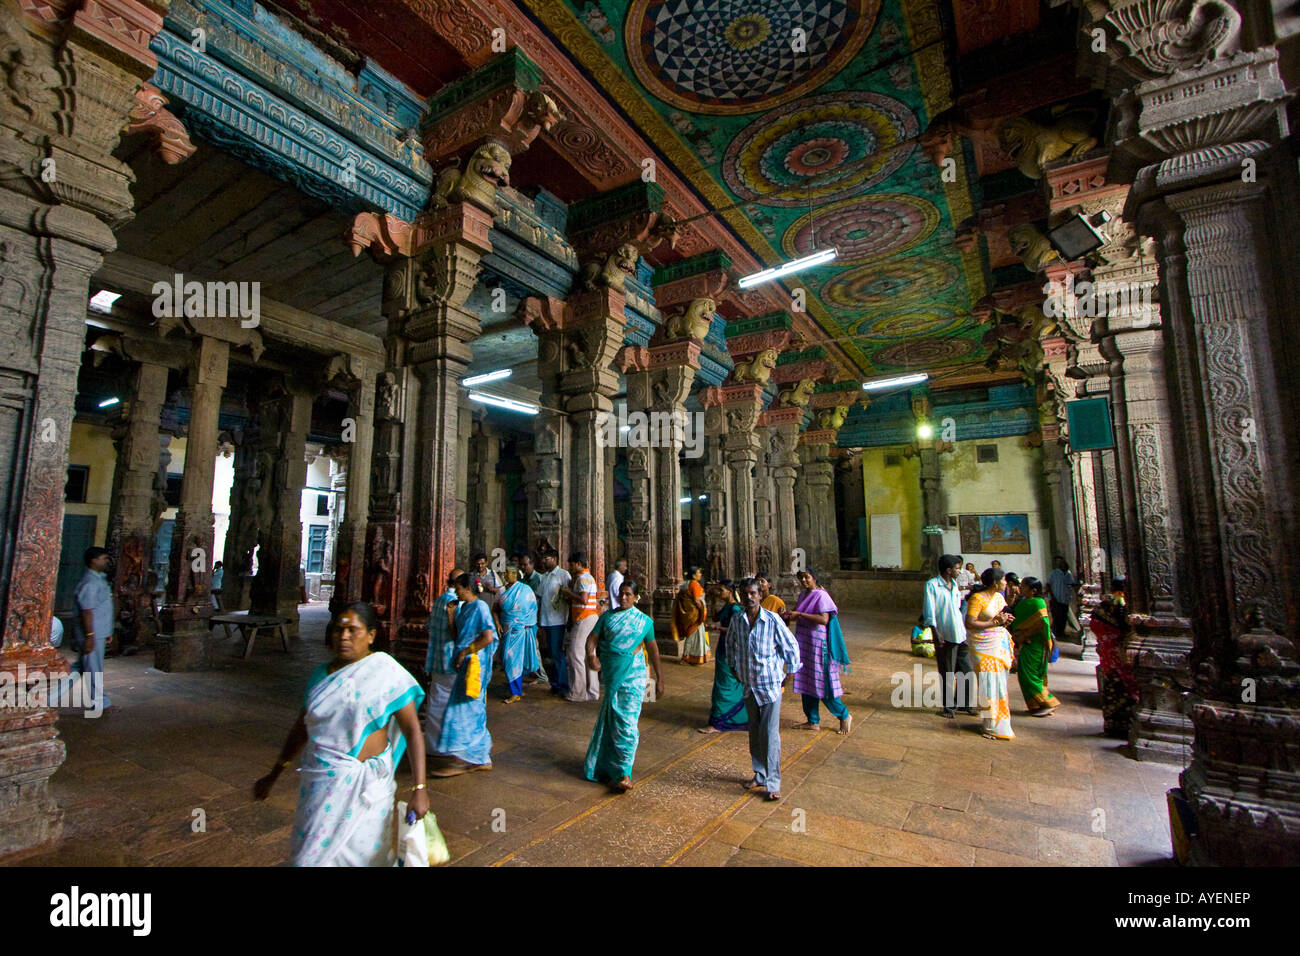 Hall Lined with Pilars Inside Sri Meenakshi Hindu Temple in Madurai South India Stock Photo